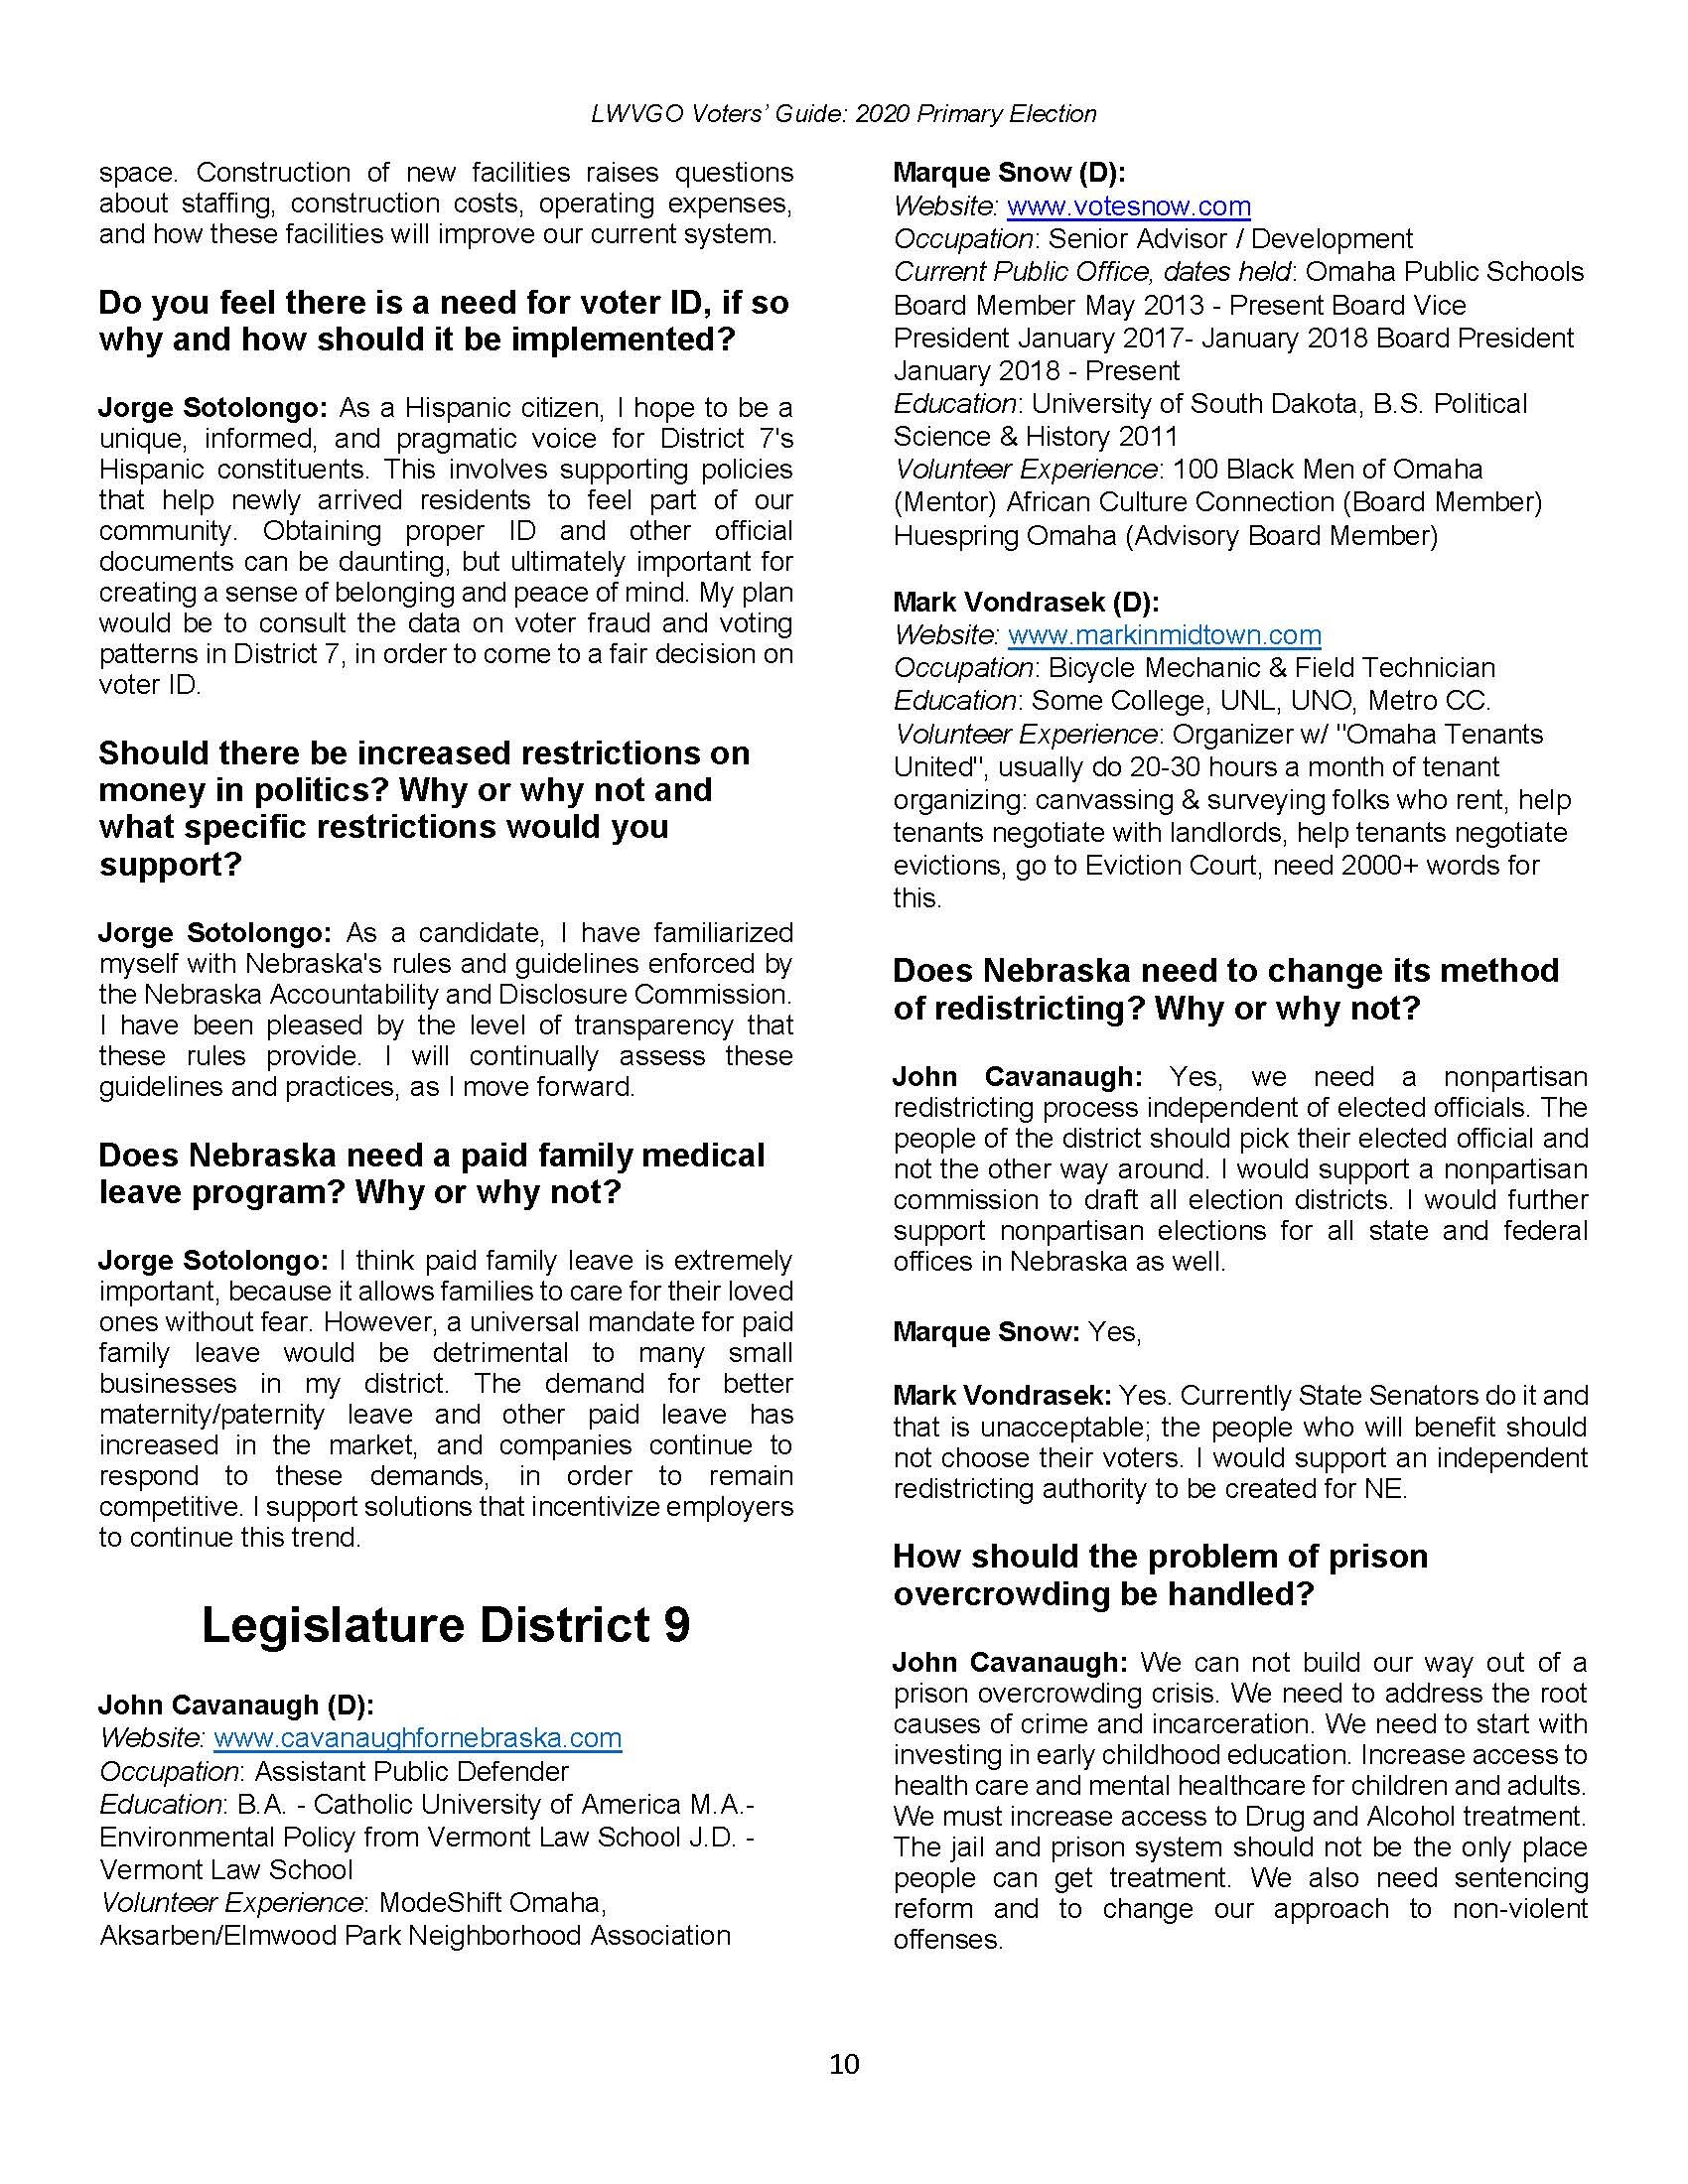 2020-Primary-Voters-Guide-LWVGO_0_Page_10.jpg